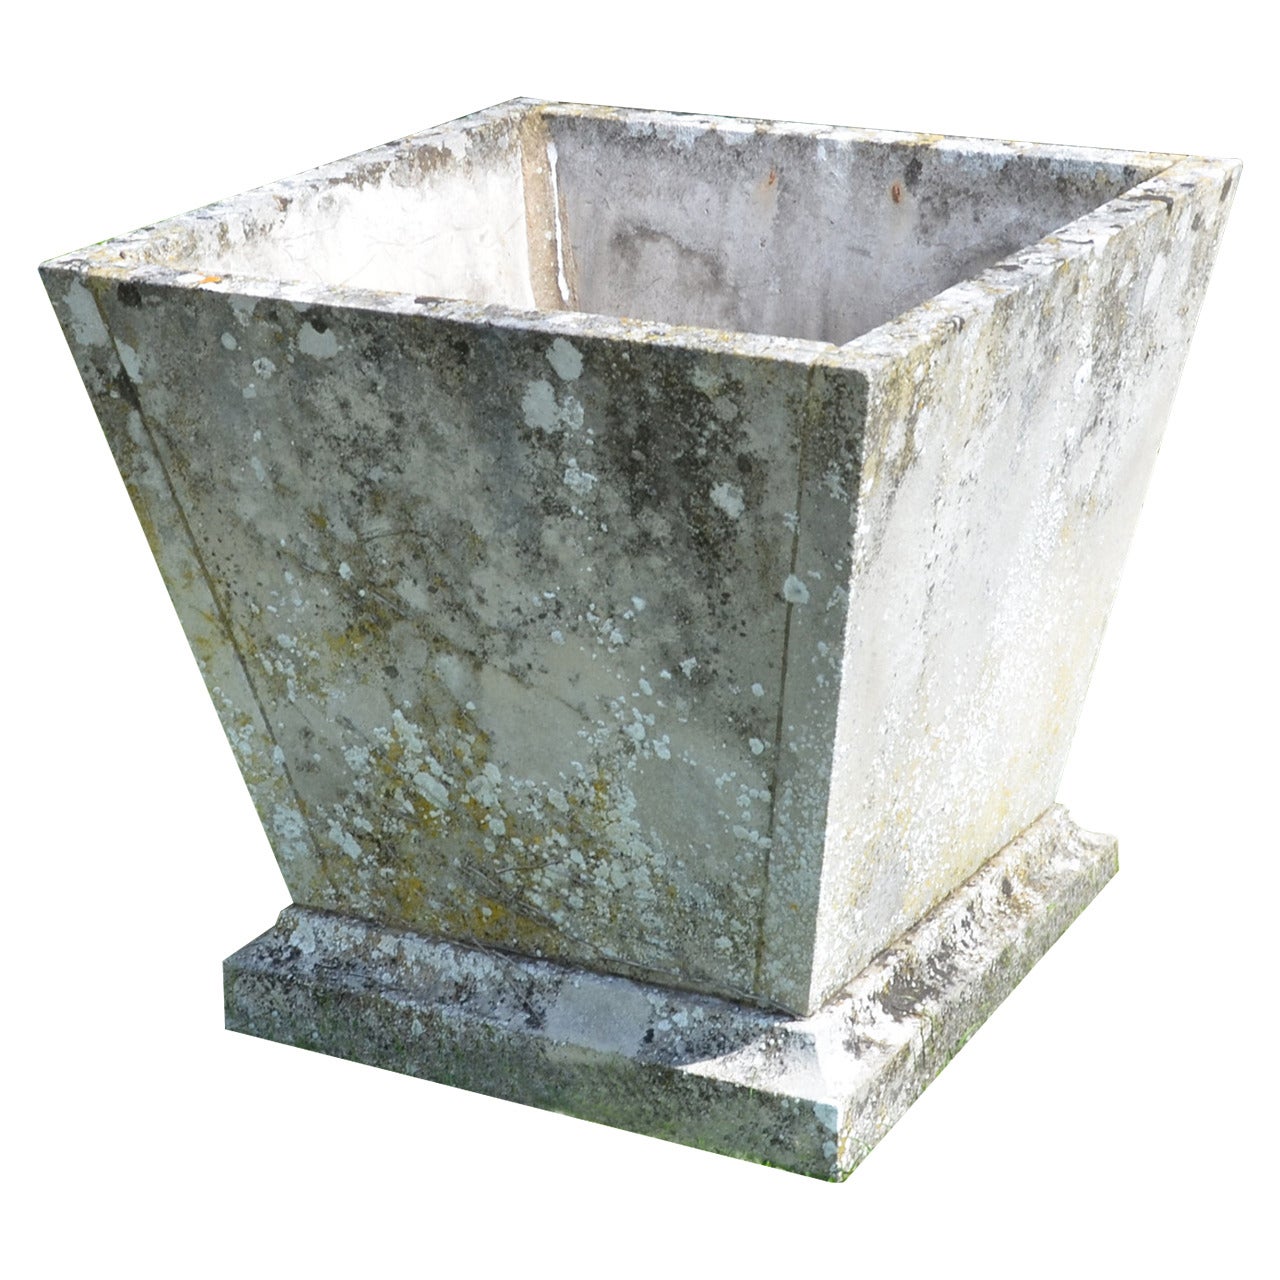 Single Mid-20th Century Tapered Square Stone Planter For Sale